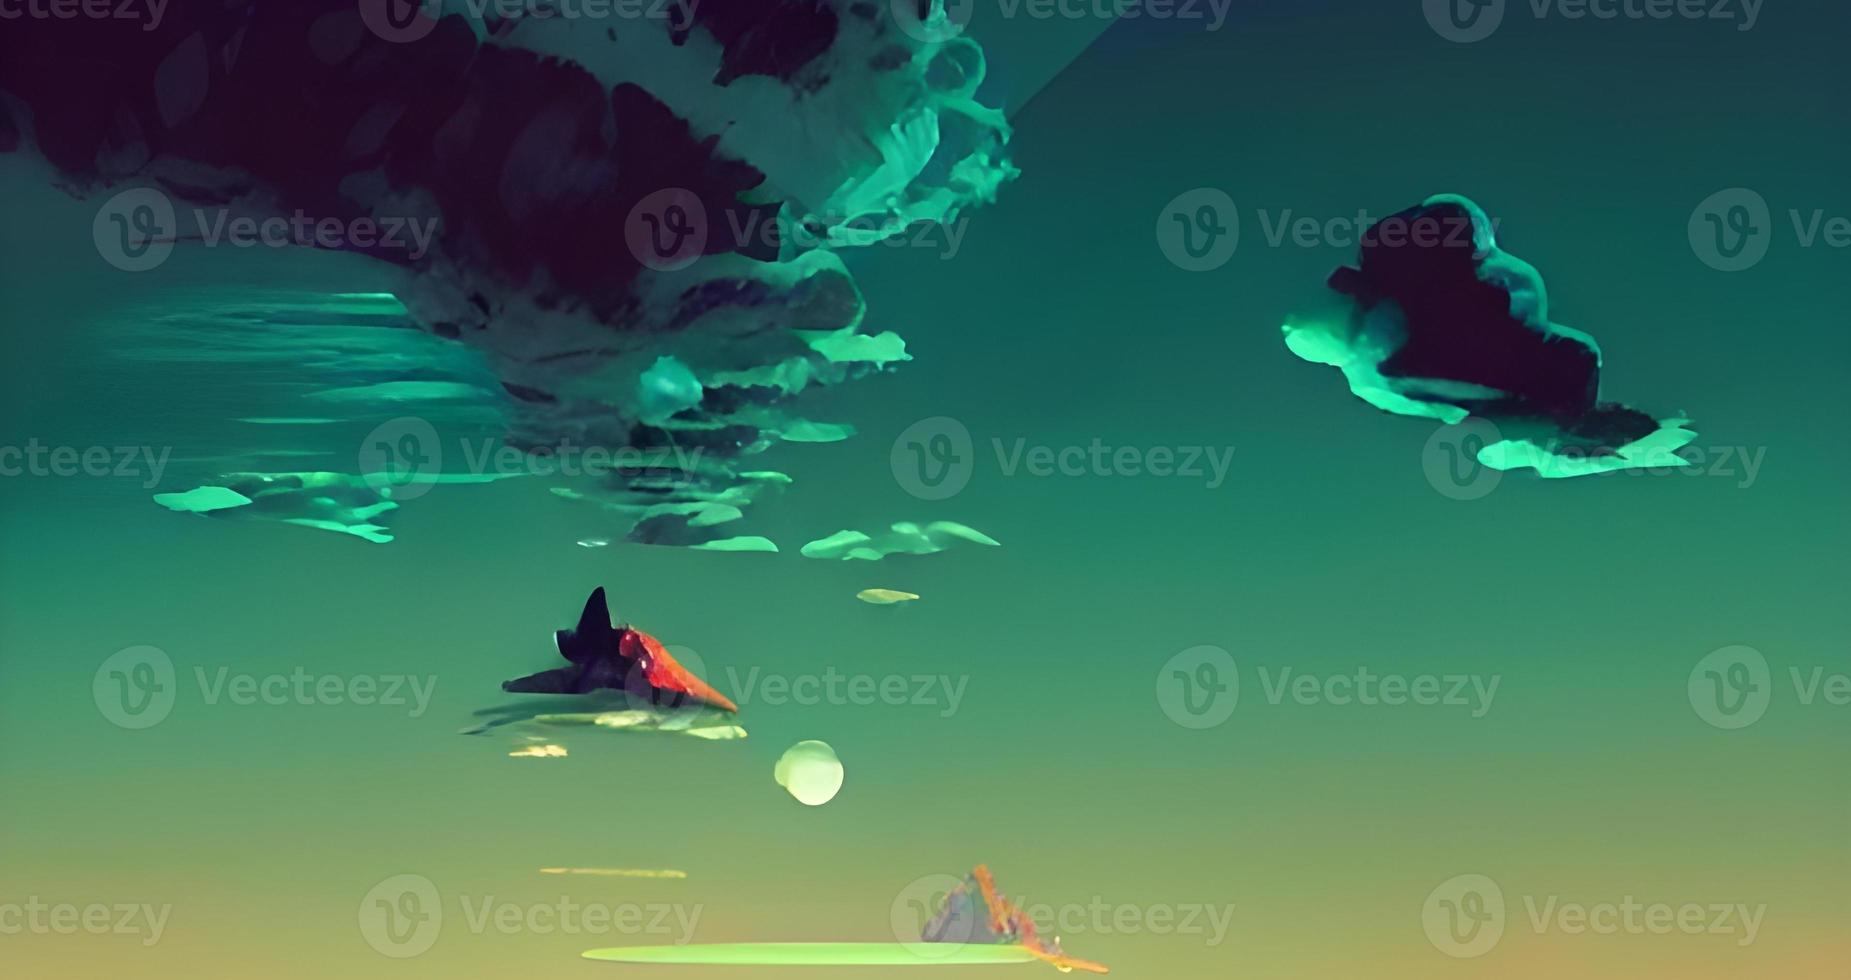 Space game background, night alien fantasy landscape with flying rocks, planets in dark starry sky. Extraterrestrial glowing liquid plasma spots in cracked land surface, Cartoon photo